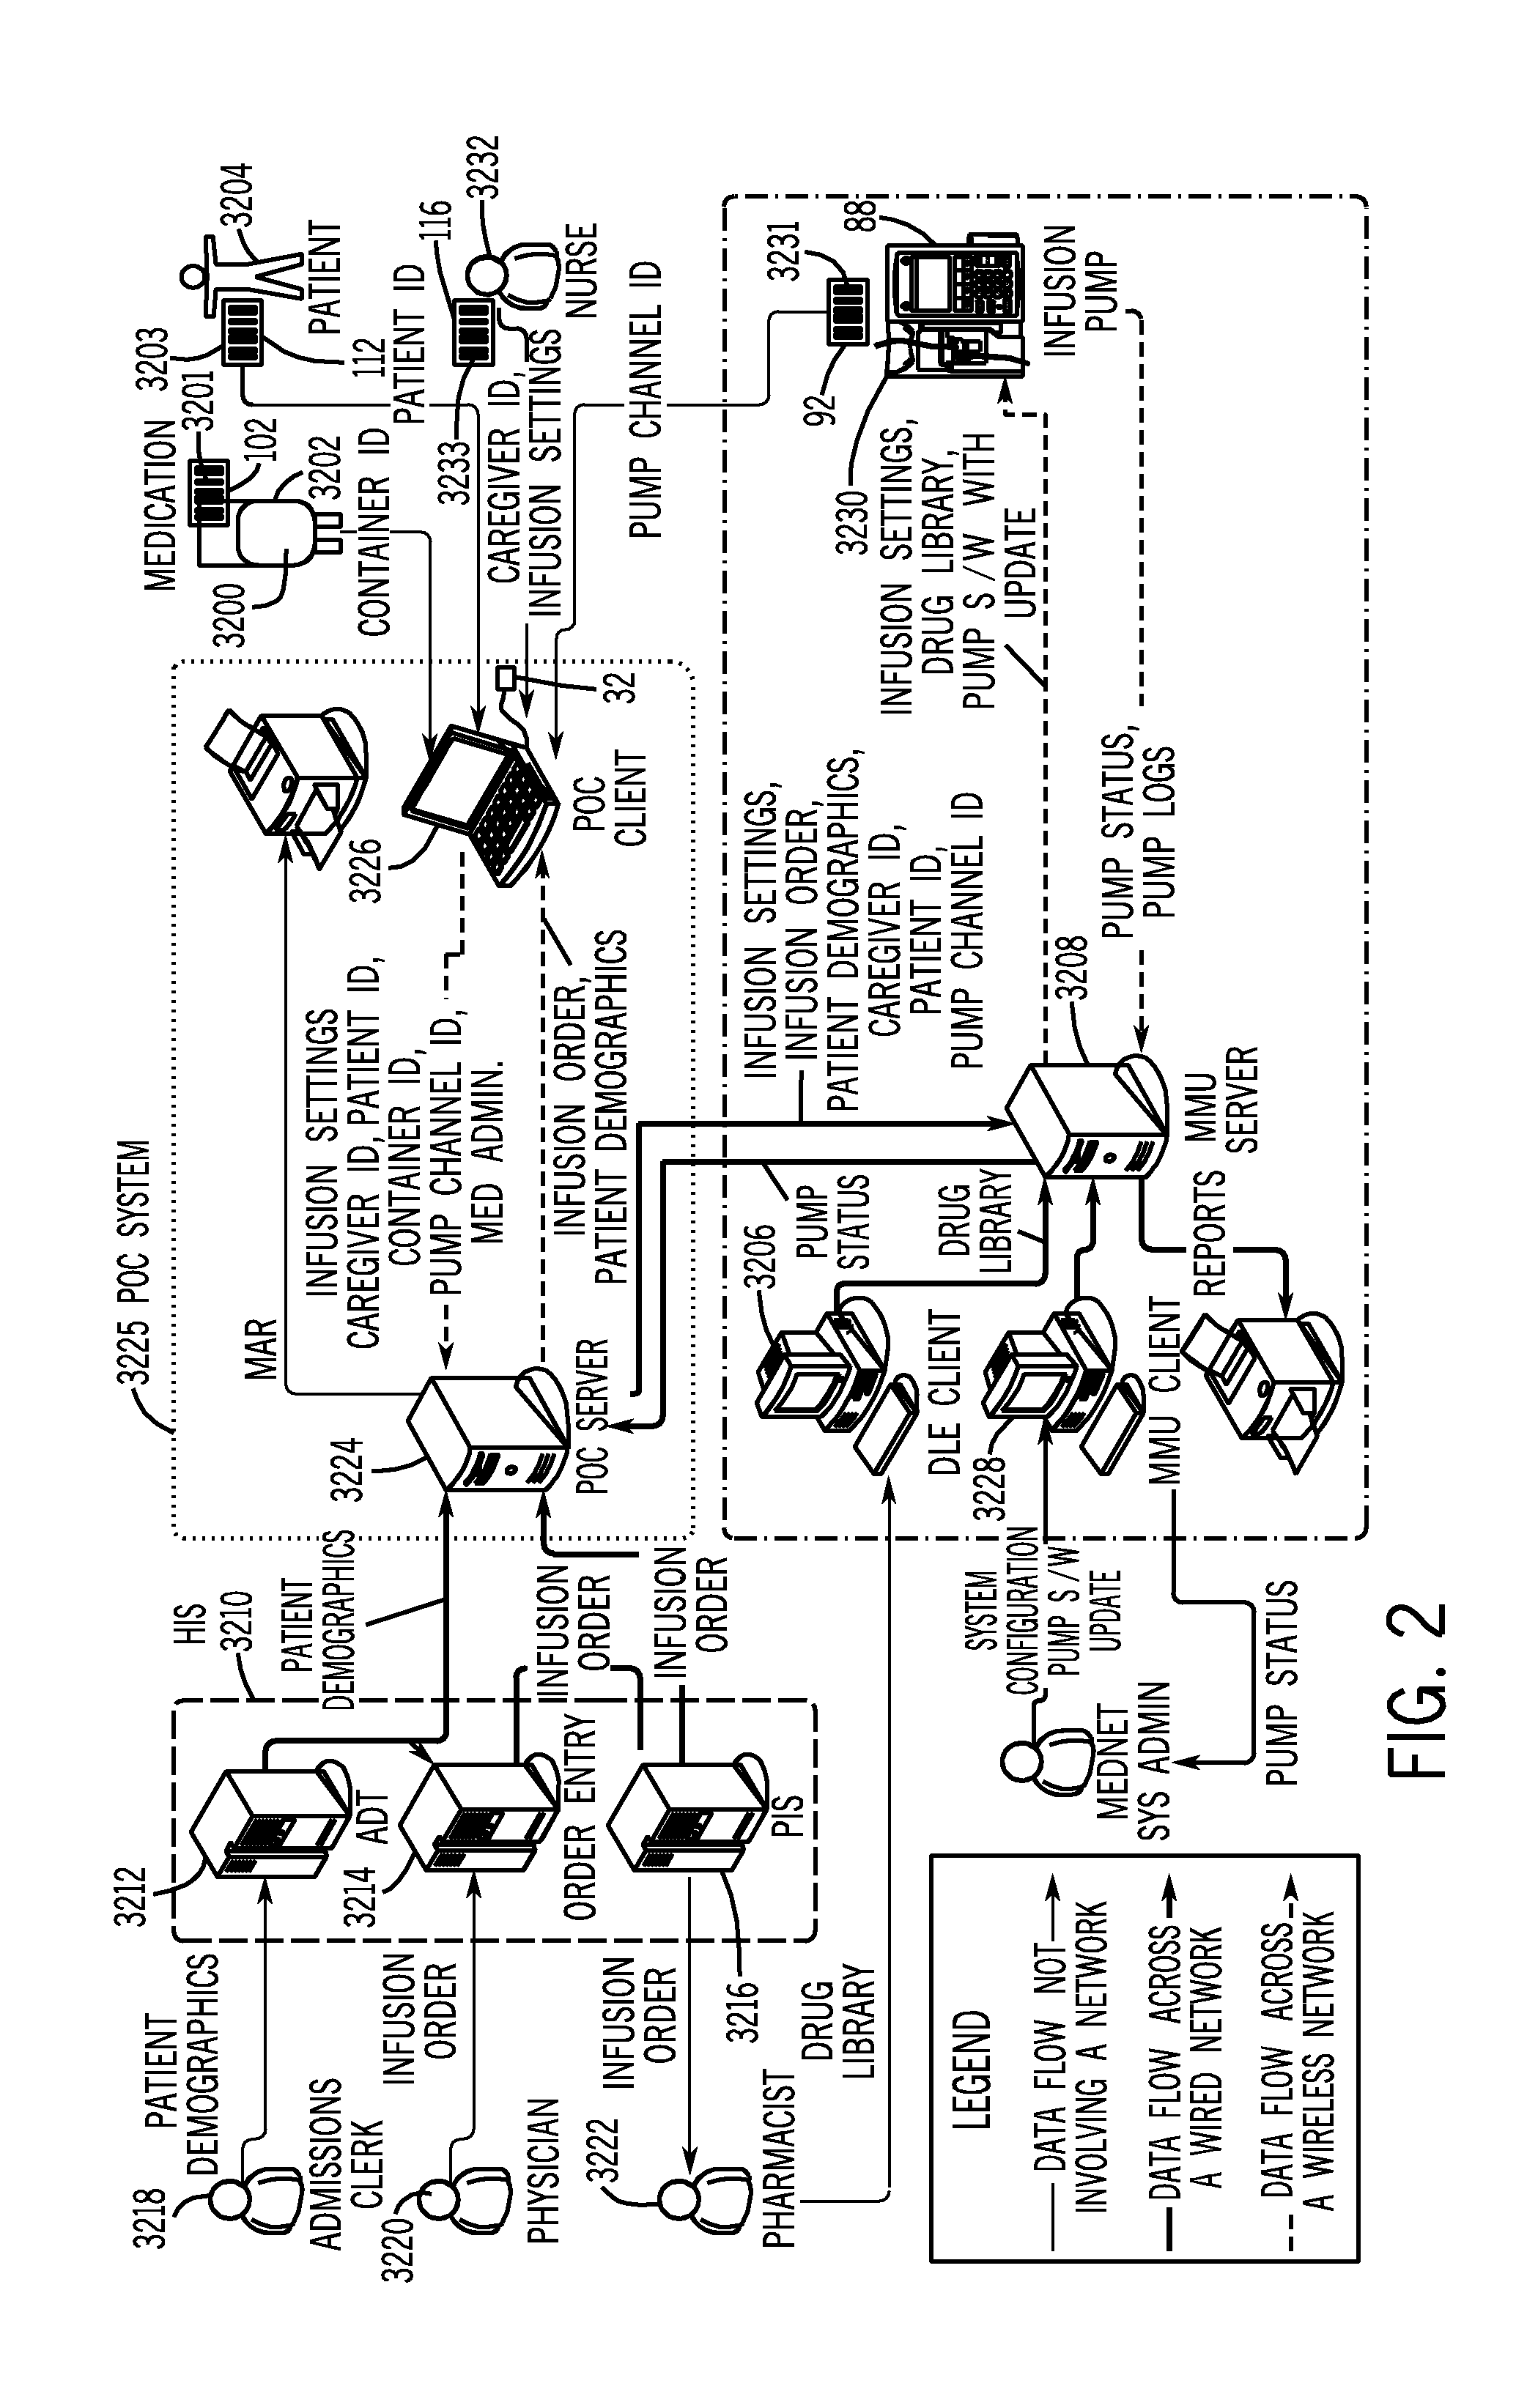 Medication administration and management system and method